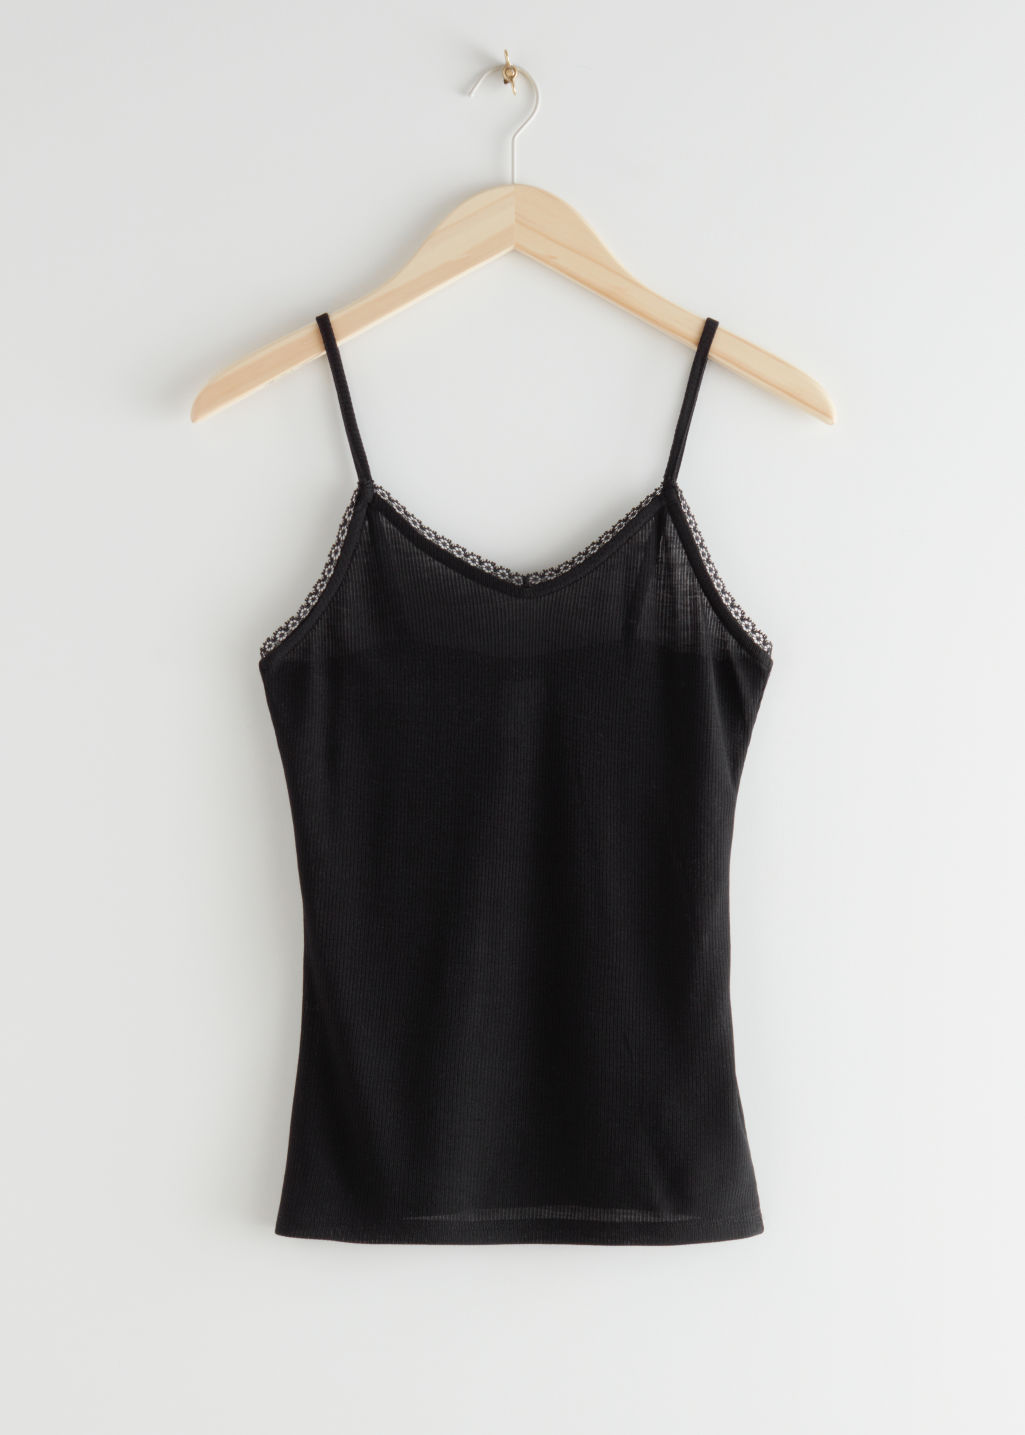 Ribbed Strap Top - Black - Tanktops & Camisoles - & Other Stories